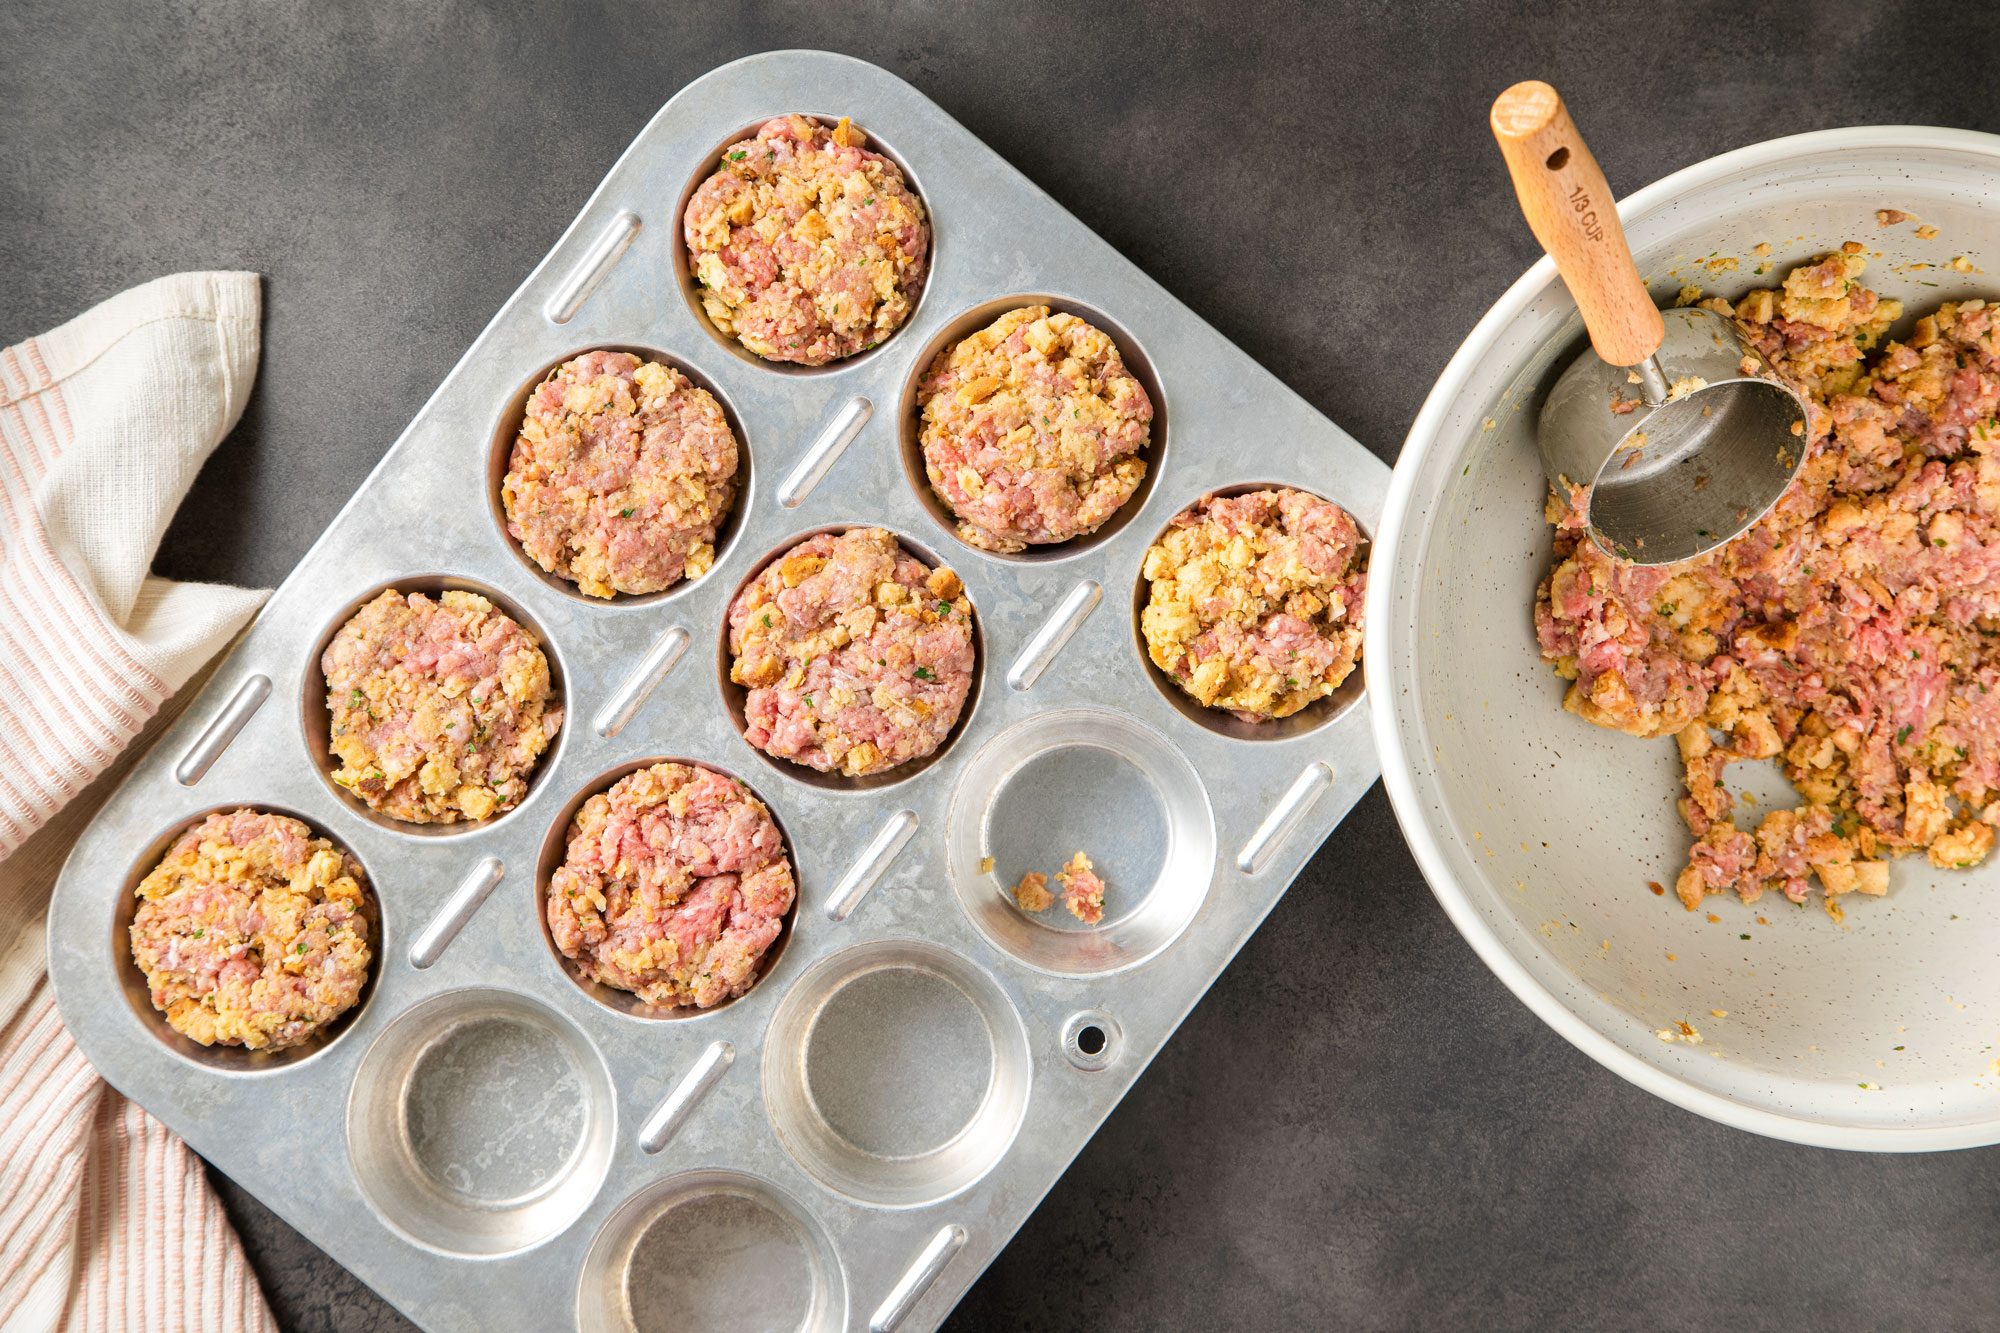 Meat Mixture Filled in Muffin Pan Bowls